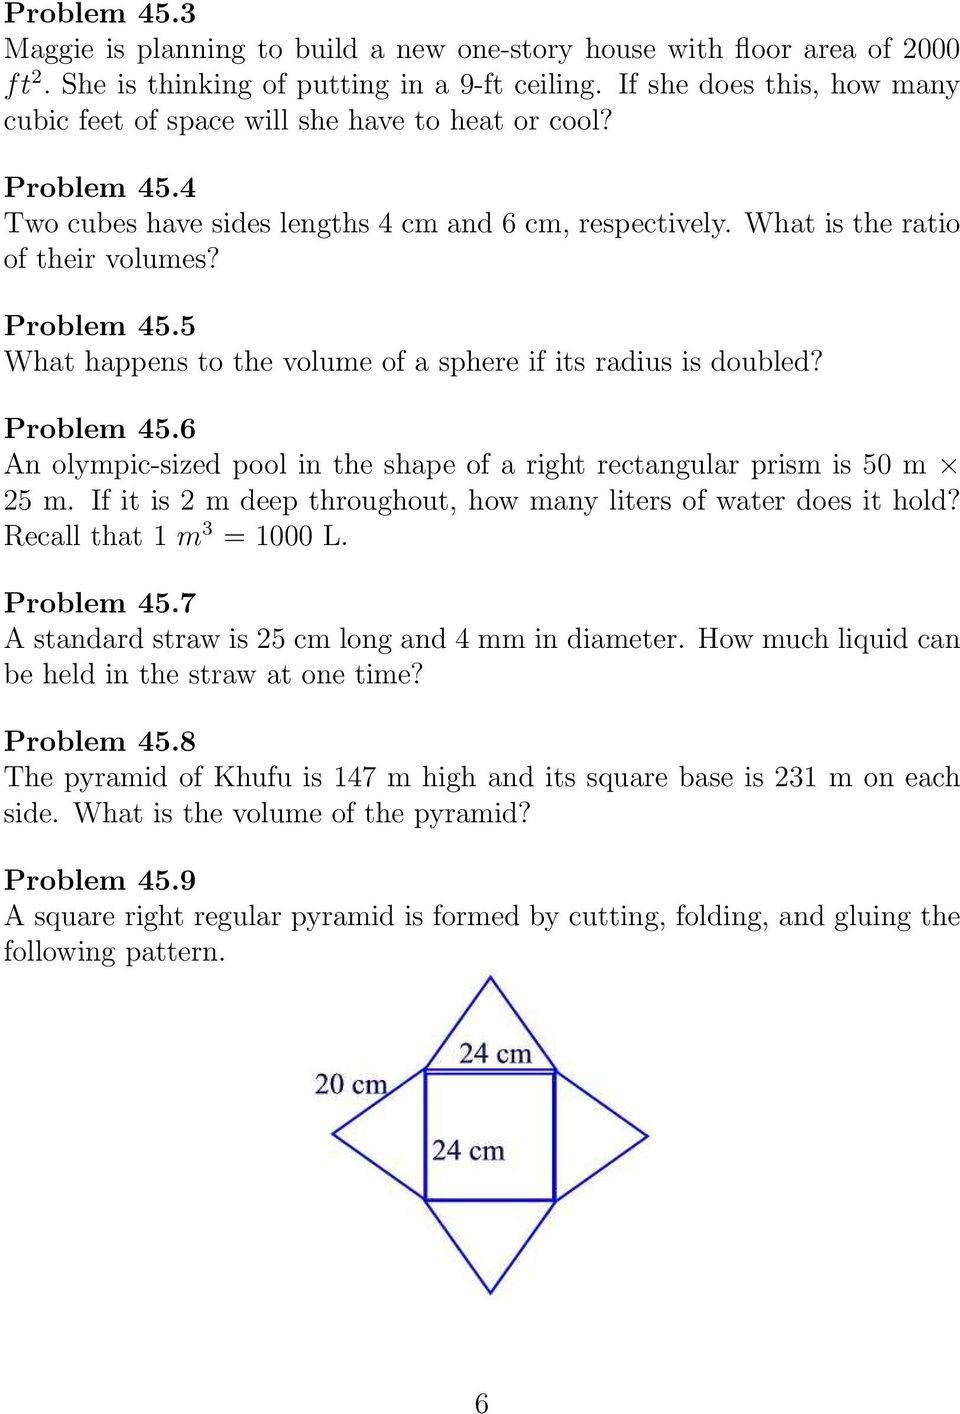 Problem 45.6 An olympic-sized pool in the shape of a right rectangular prism is 50 m 25 m. If it is 2 m deep throughout, how many liters of water does it hold? Recall that 1 m 3 = 1000 L. Problem 45.